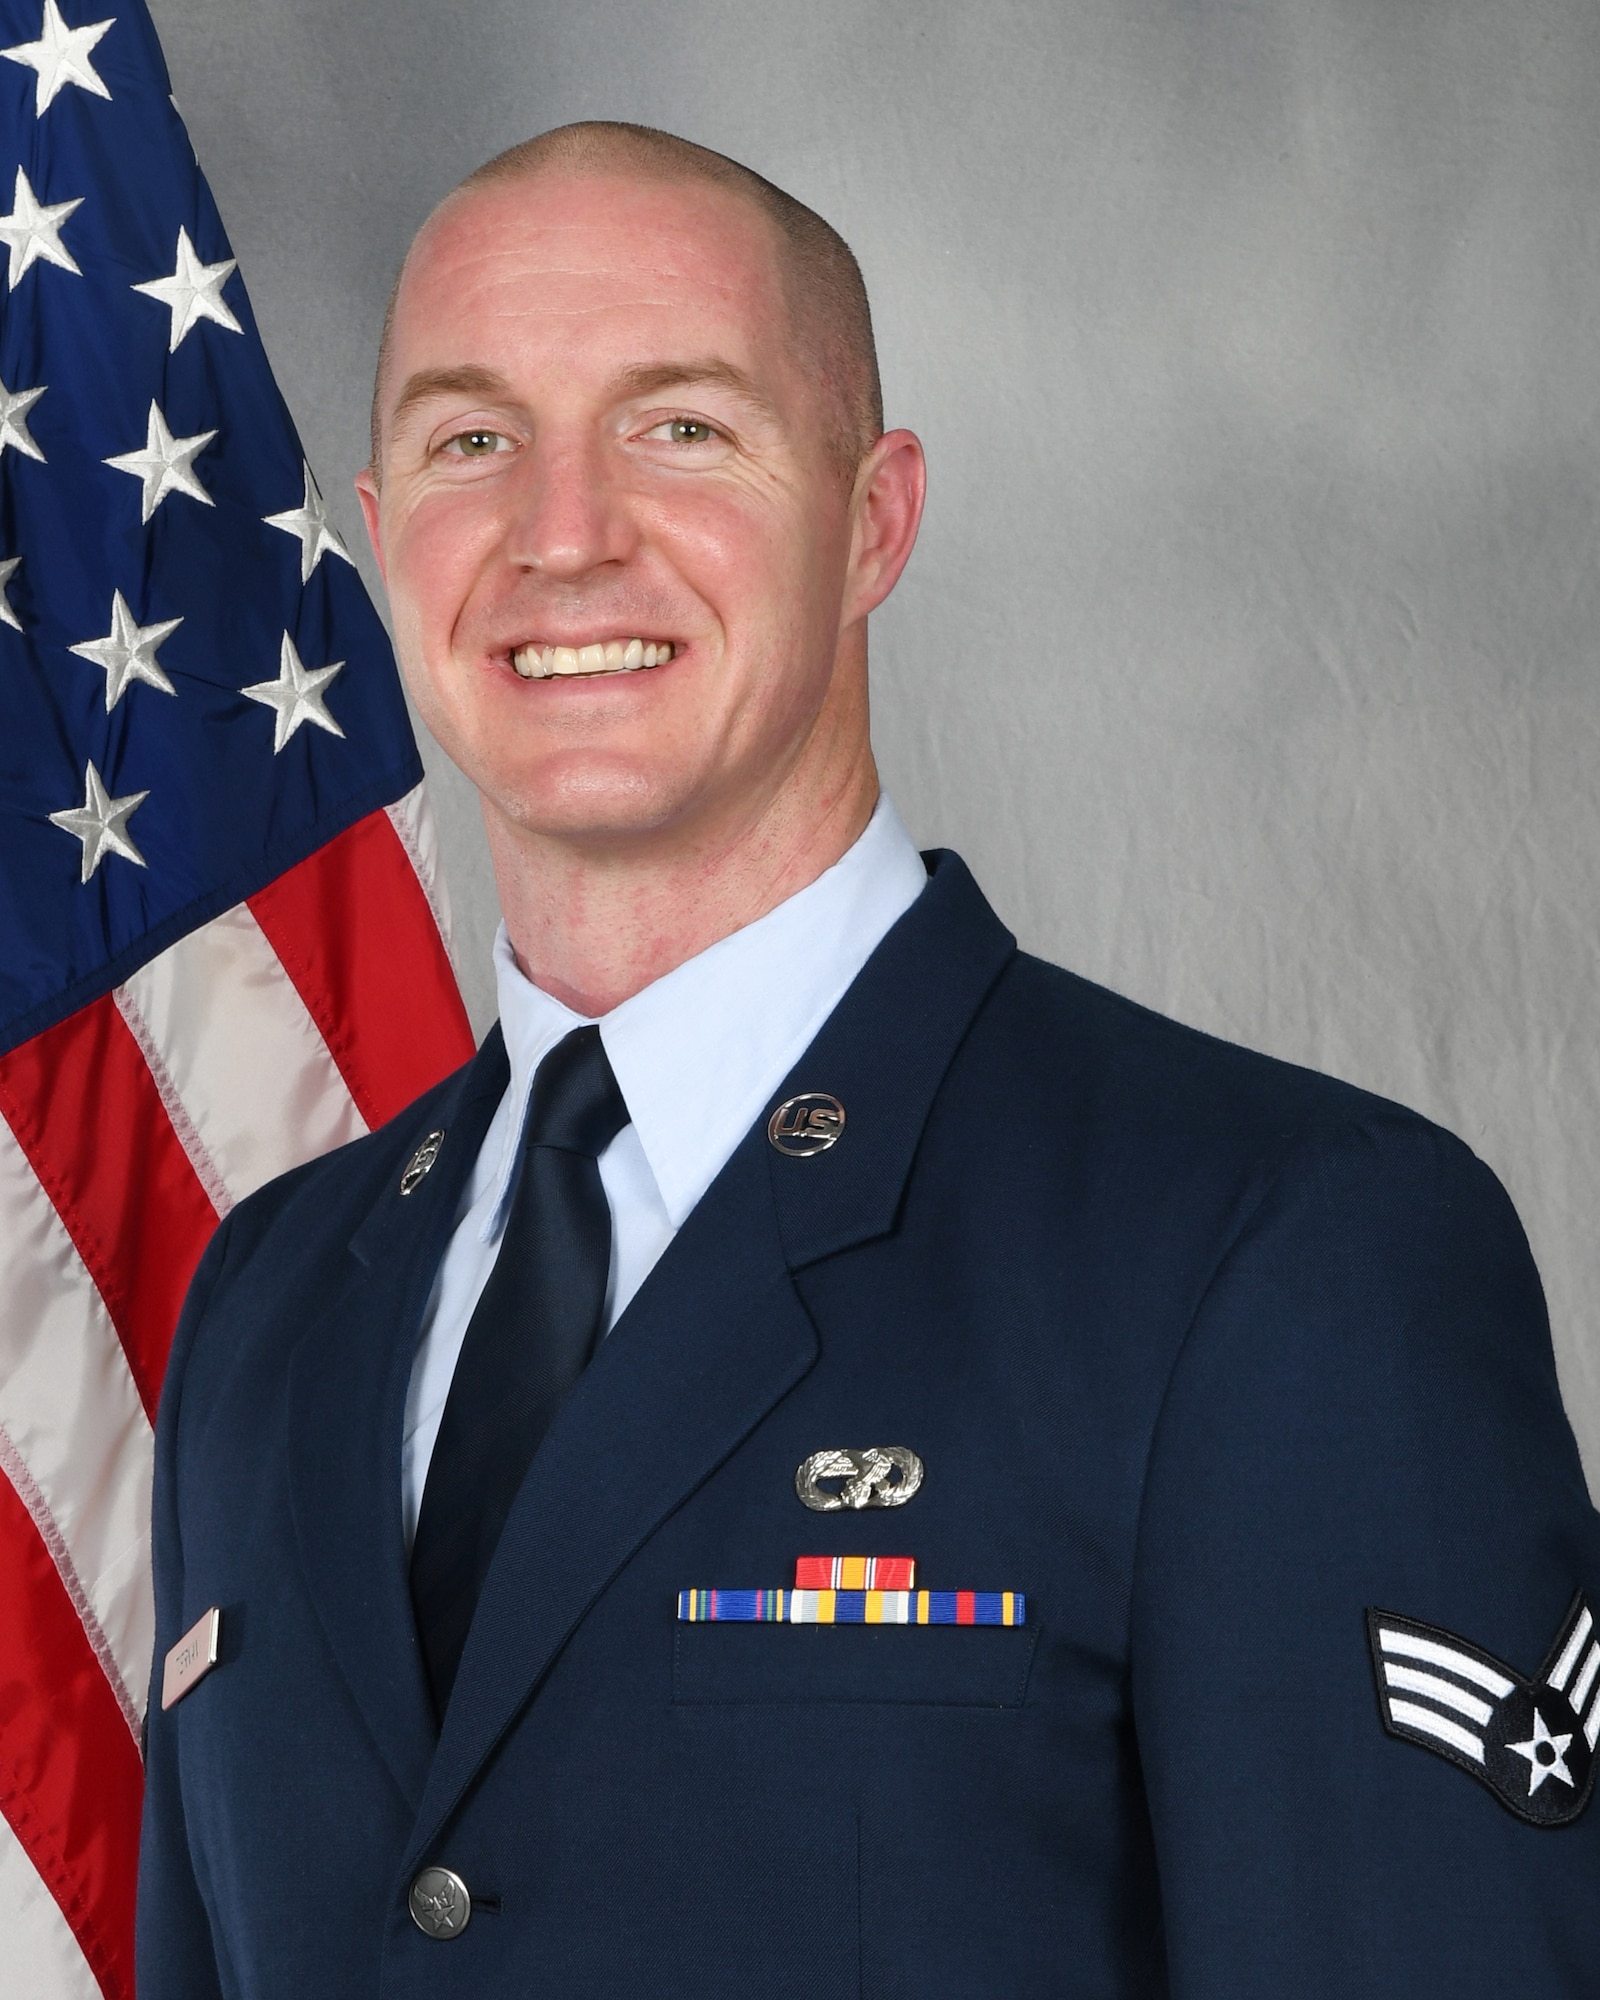 Official Air Force photo for Senior Airman Marc Tiernan. Tiernan is the 131st Bomb Wing’s 2021 Outstanding Junior Enlisted Airman of the Year. (U.S. Air National Guard photo by Senior Master Sgt. Marydale Amison)